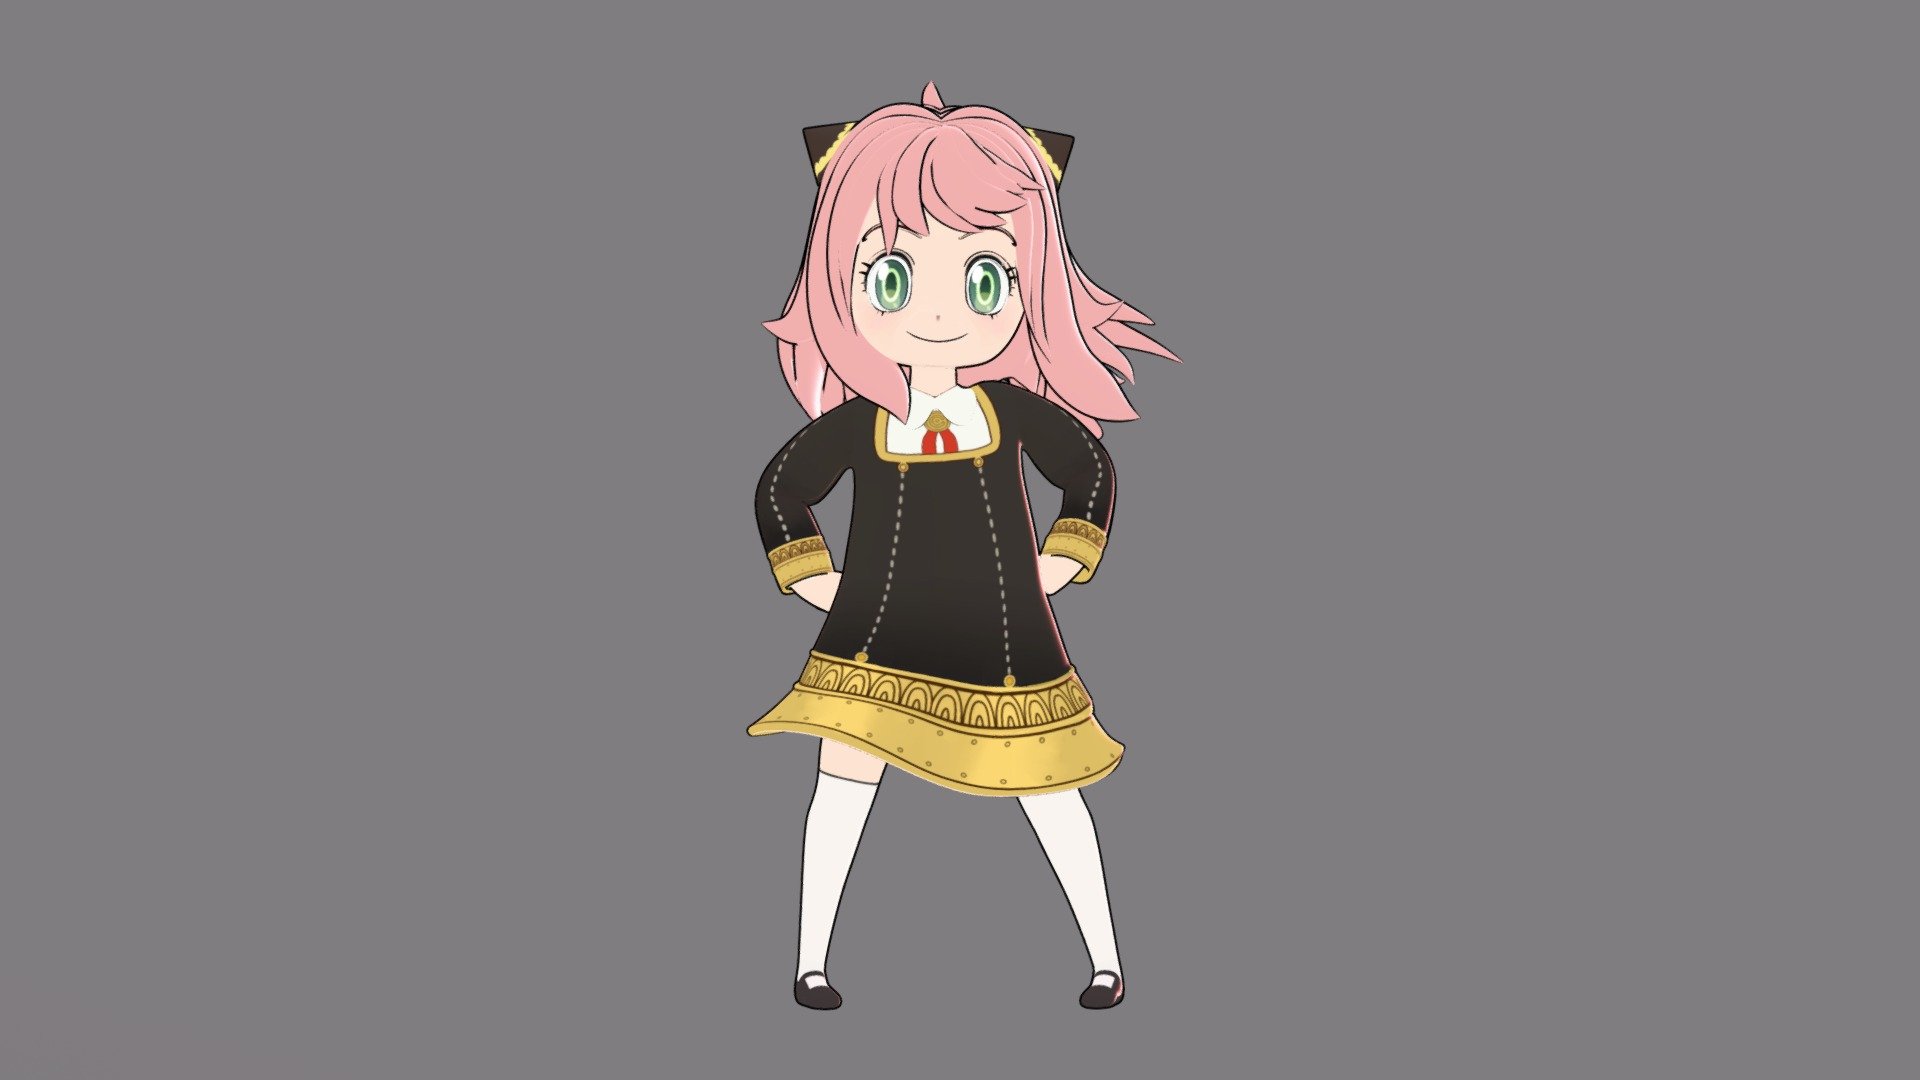 Anya Forger is one of the characters that has made me laugh the most lately in anime, so I decided to make a rig for personal projects and now you can also make your own animations with her.

The rig is perfectly compatible with Blender 3.0 and above, it still has a visibility problem with blender 2.9 that I want to solve soon.

The structure is based on Rigify but with some improvements for the facial rig, hair, and skirt.

-It has 13 facial expressions in the pose library.

-It has 5 different textures for her face:

Base, Funny smile, confused, No eyelashes, Shock face.

-3 textures for her eyes:

Base, solid color, and shiny with a star.

-28 Selections sets

All the textures are already packed with the blender file but I am uploading them separately just in case you need them.

You can contact me through any of my social networks if you have any problems.

Remember to Allow execution of scripts to use Rigify based rigs

Modeled and rigged by me

Based on Spy X Family

Enjoy it! - Anya Forger 3d model - Rigged - 3D model by JGCruz3d 3d model